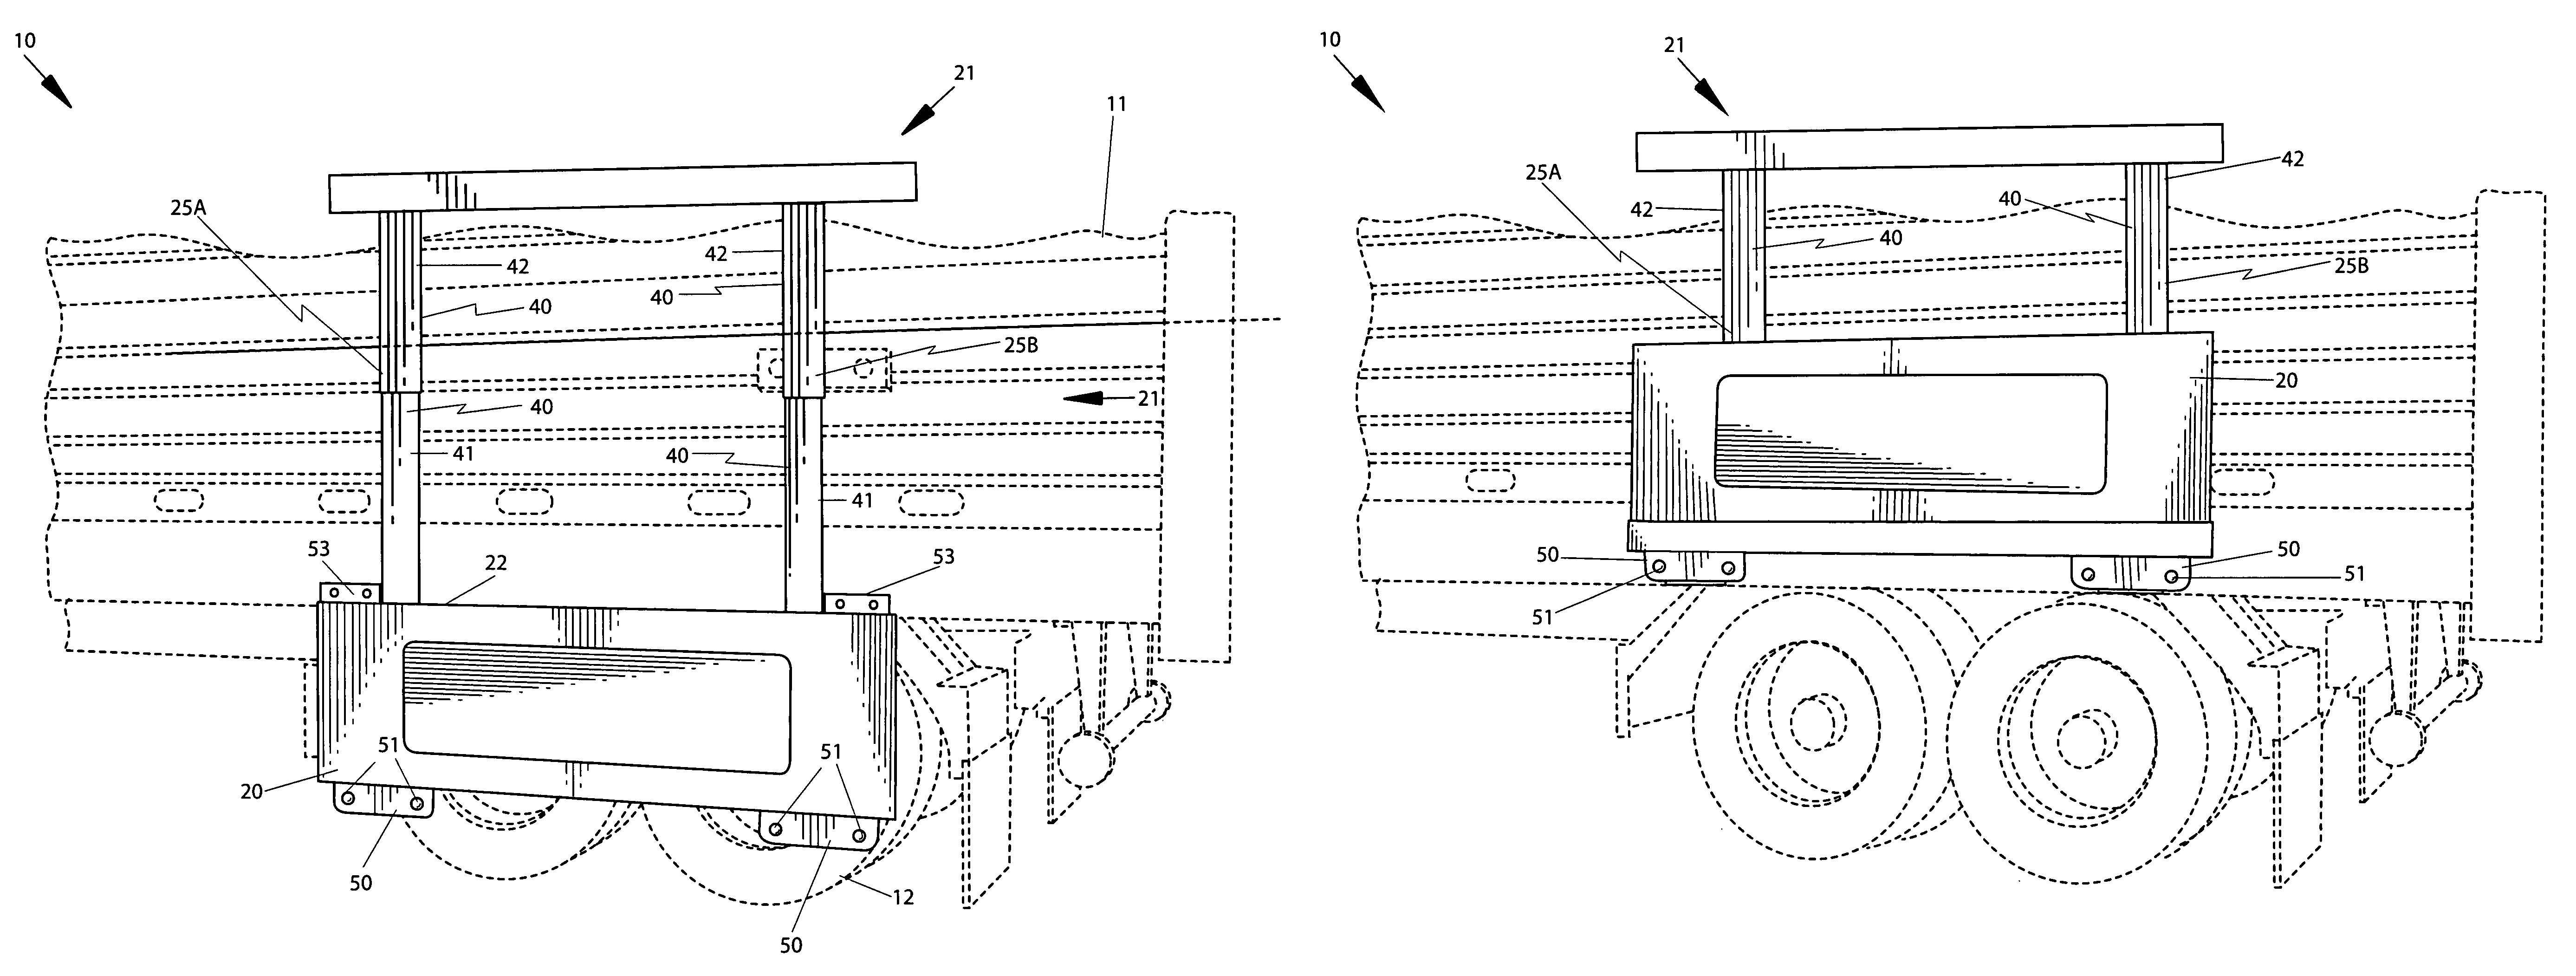 Retractable auxiliary mud flap device and associated method